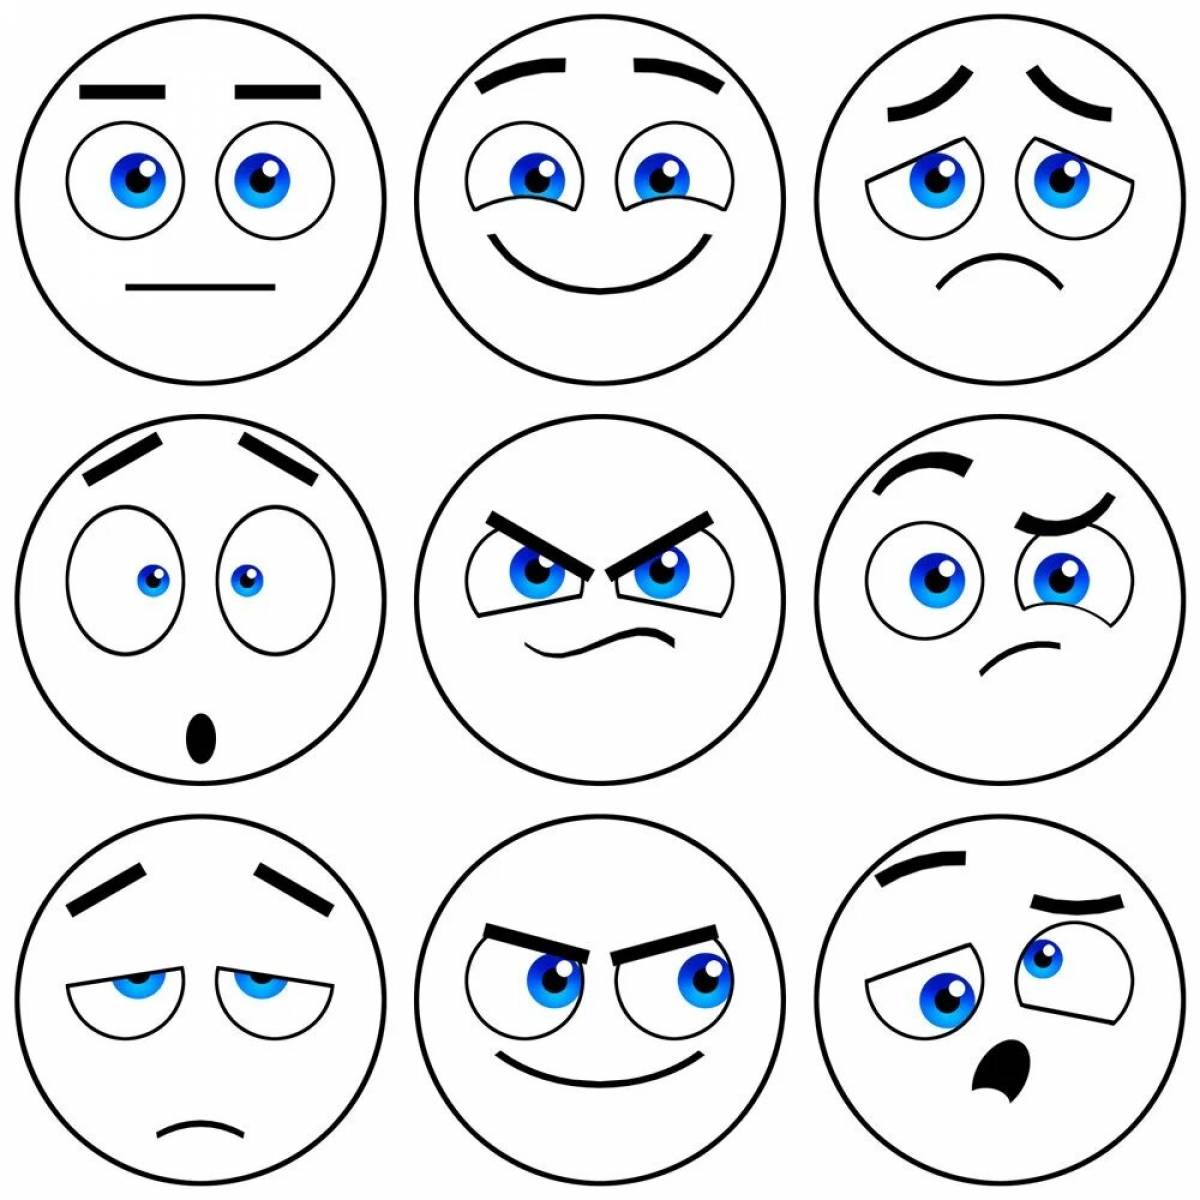 Evil emotions coloring page for kids